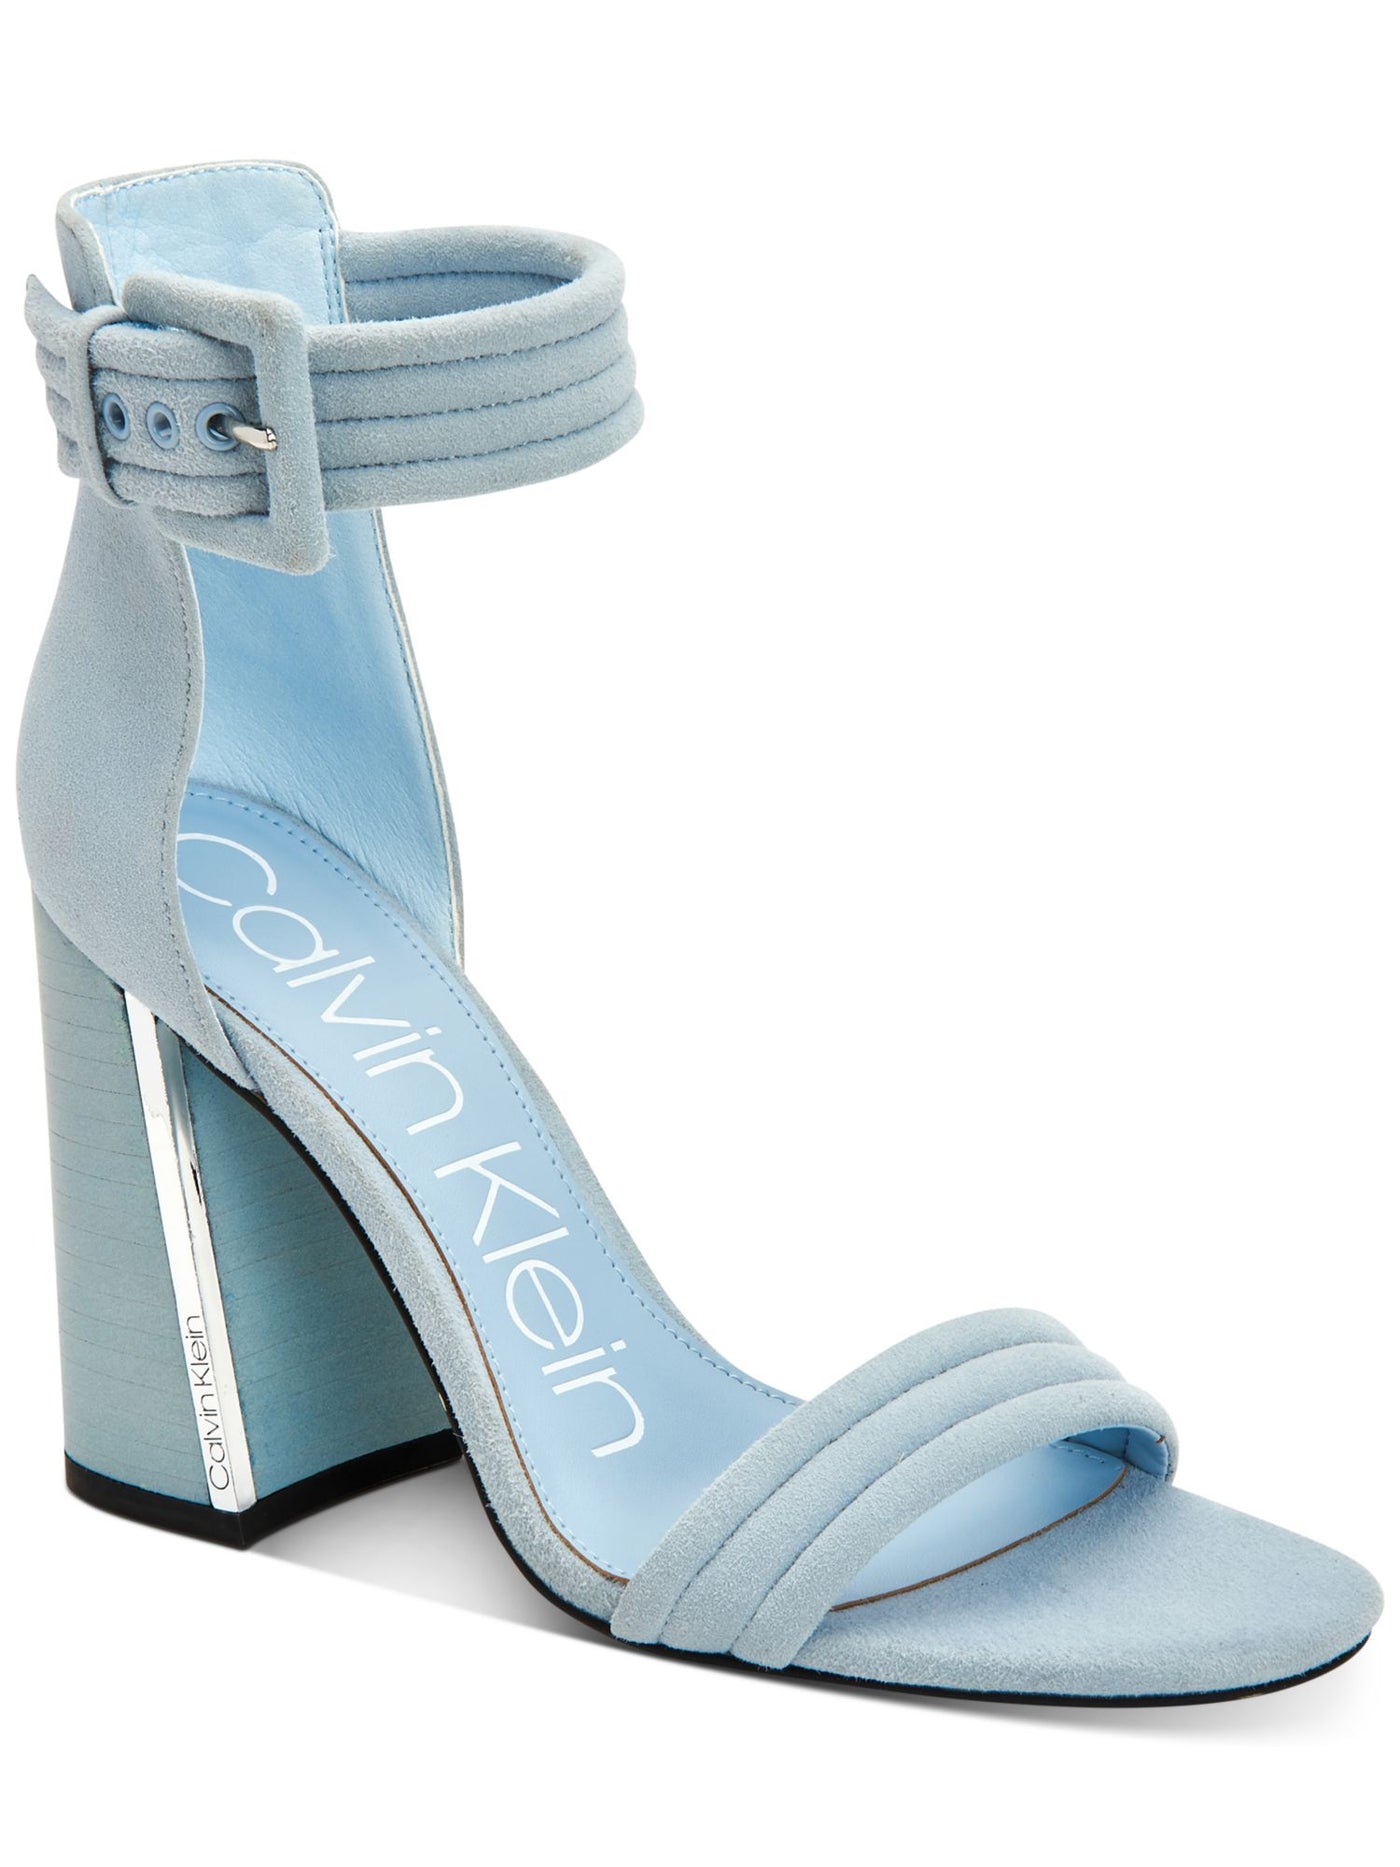 CALVIN KLEIN Womens Light Blue Padded Ankle Strap Rochanda Square Toe Block Heel Buckle Leather Sandals Shoes 11 M